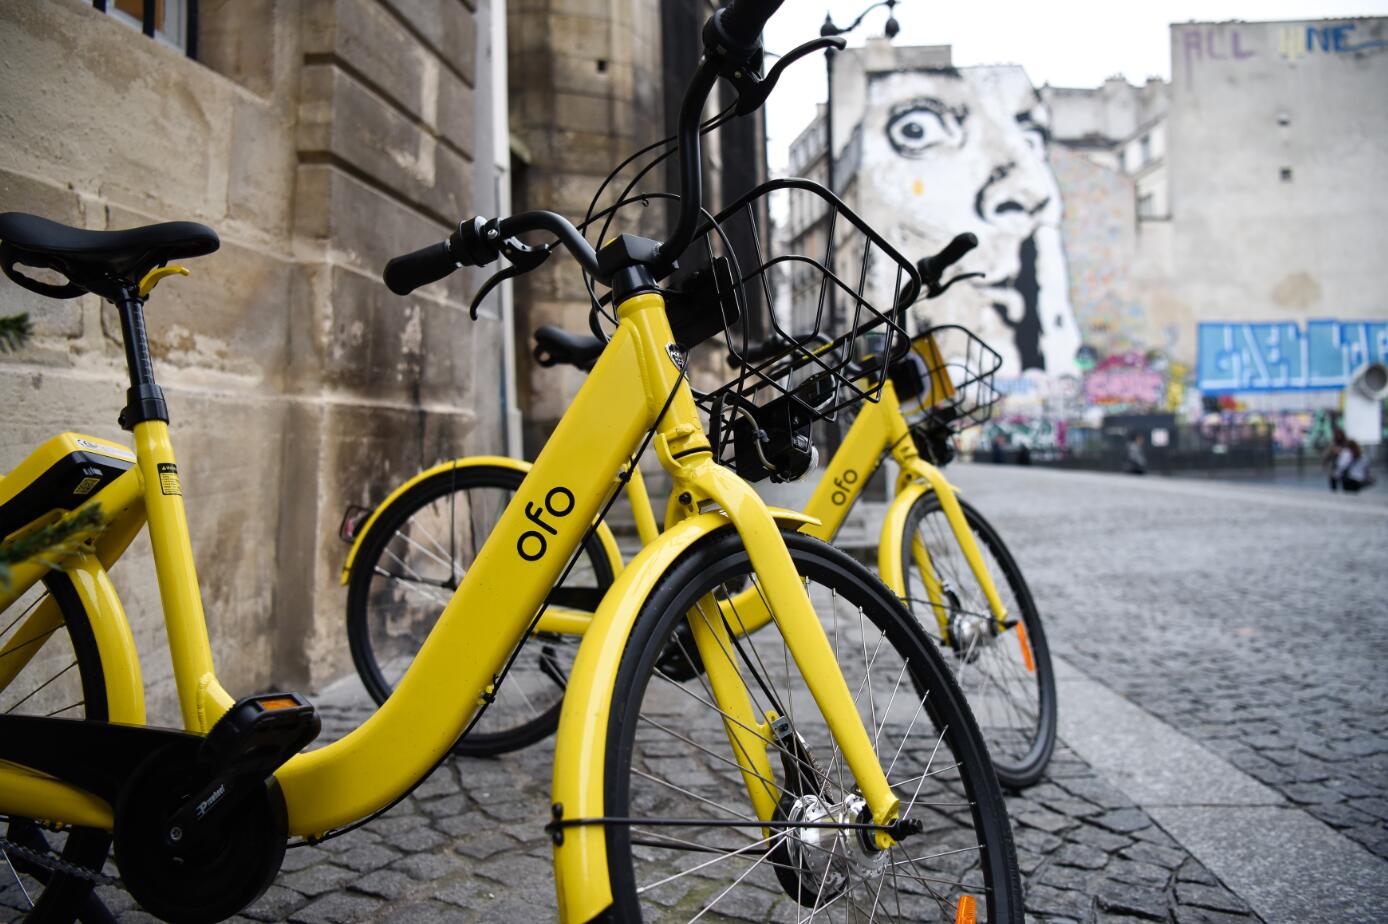 Ofo faces flak on refunds of deposits